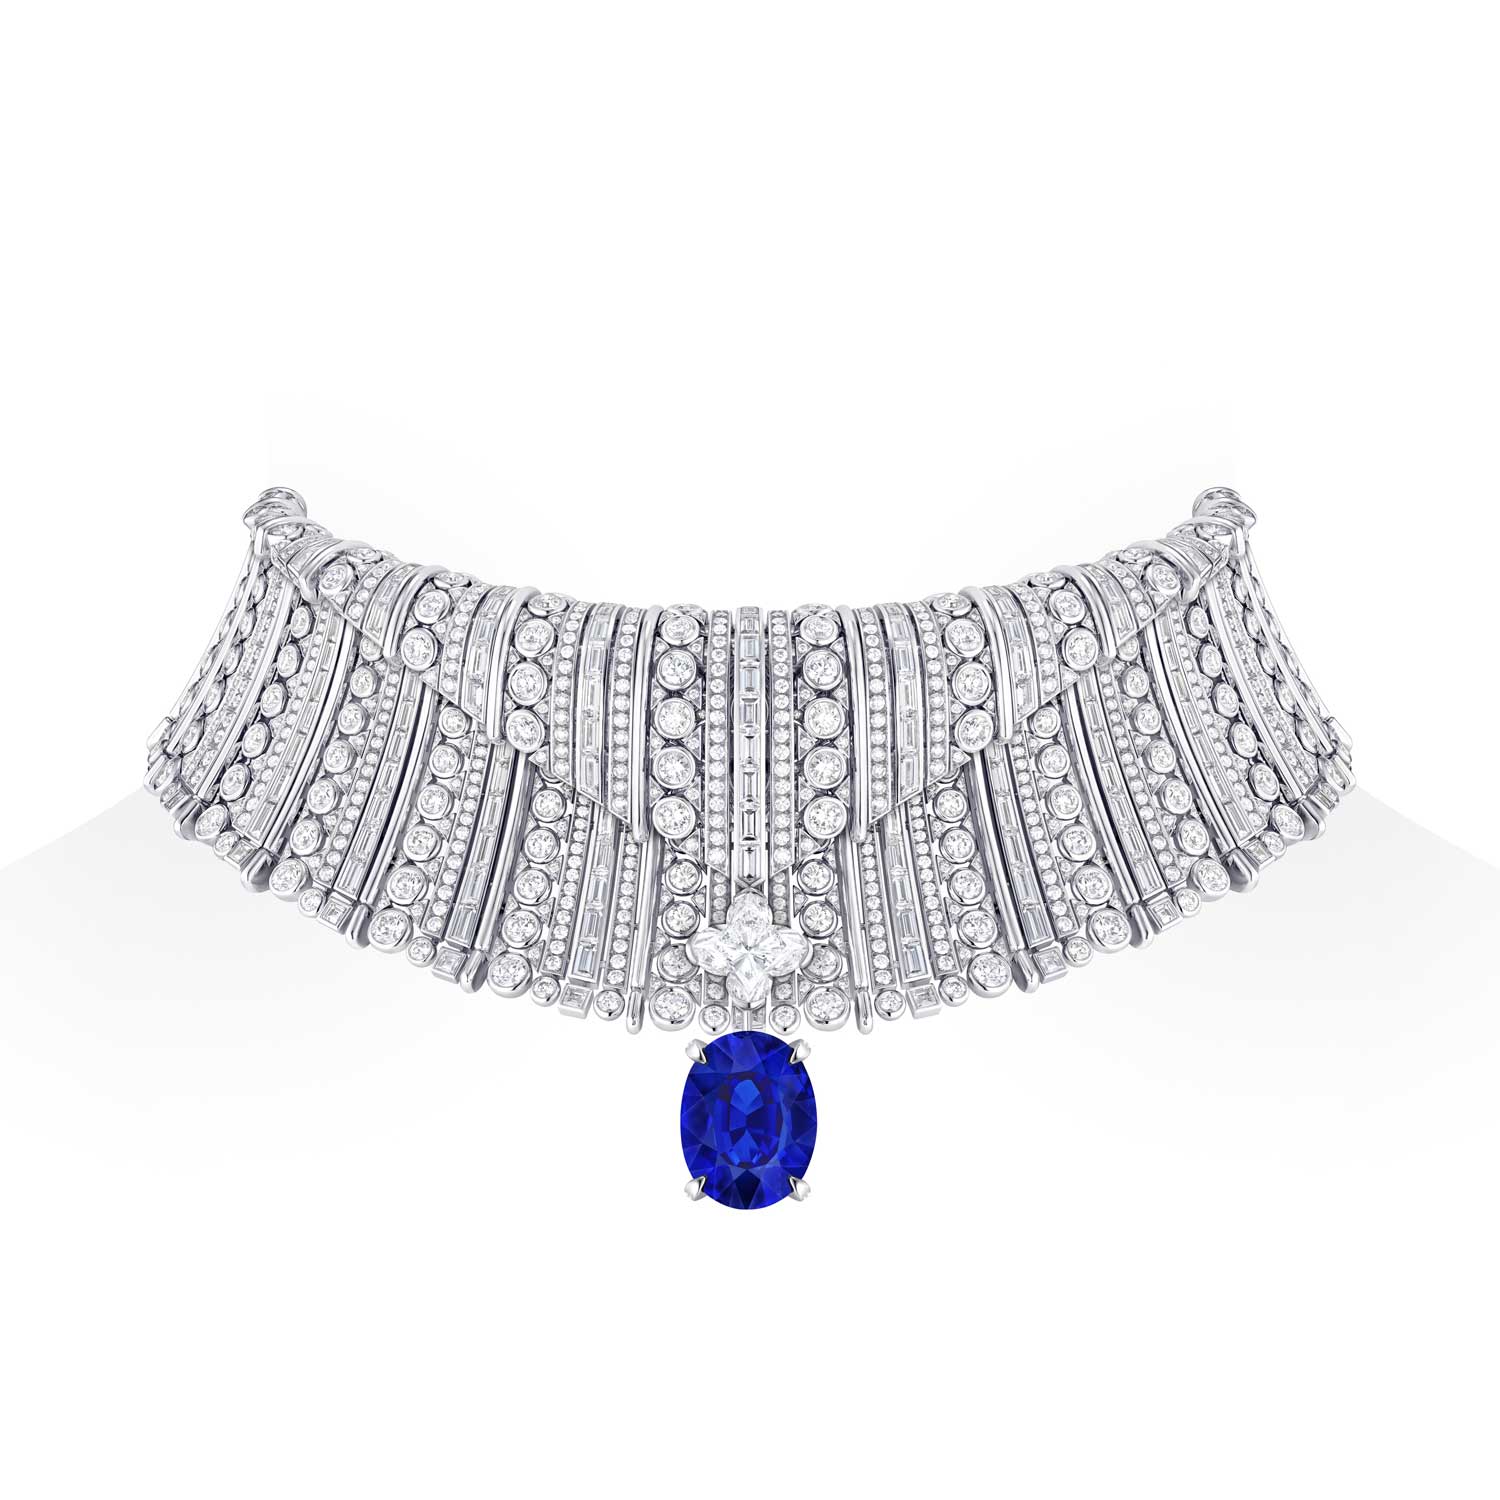 9 of the Most Extraordinary New High Jewelry Pieces This Season